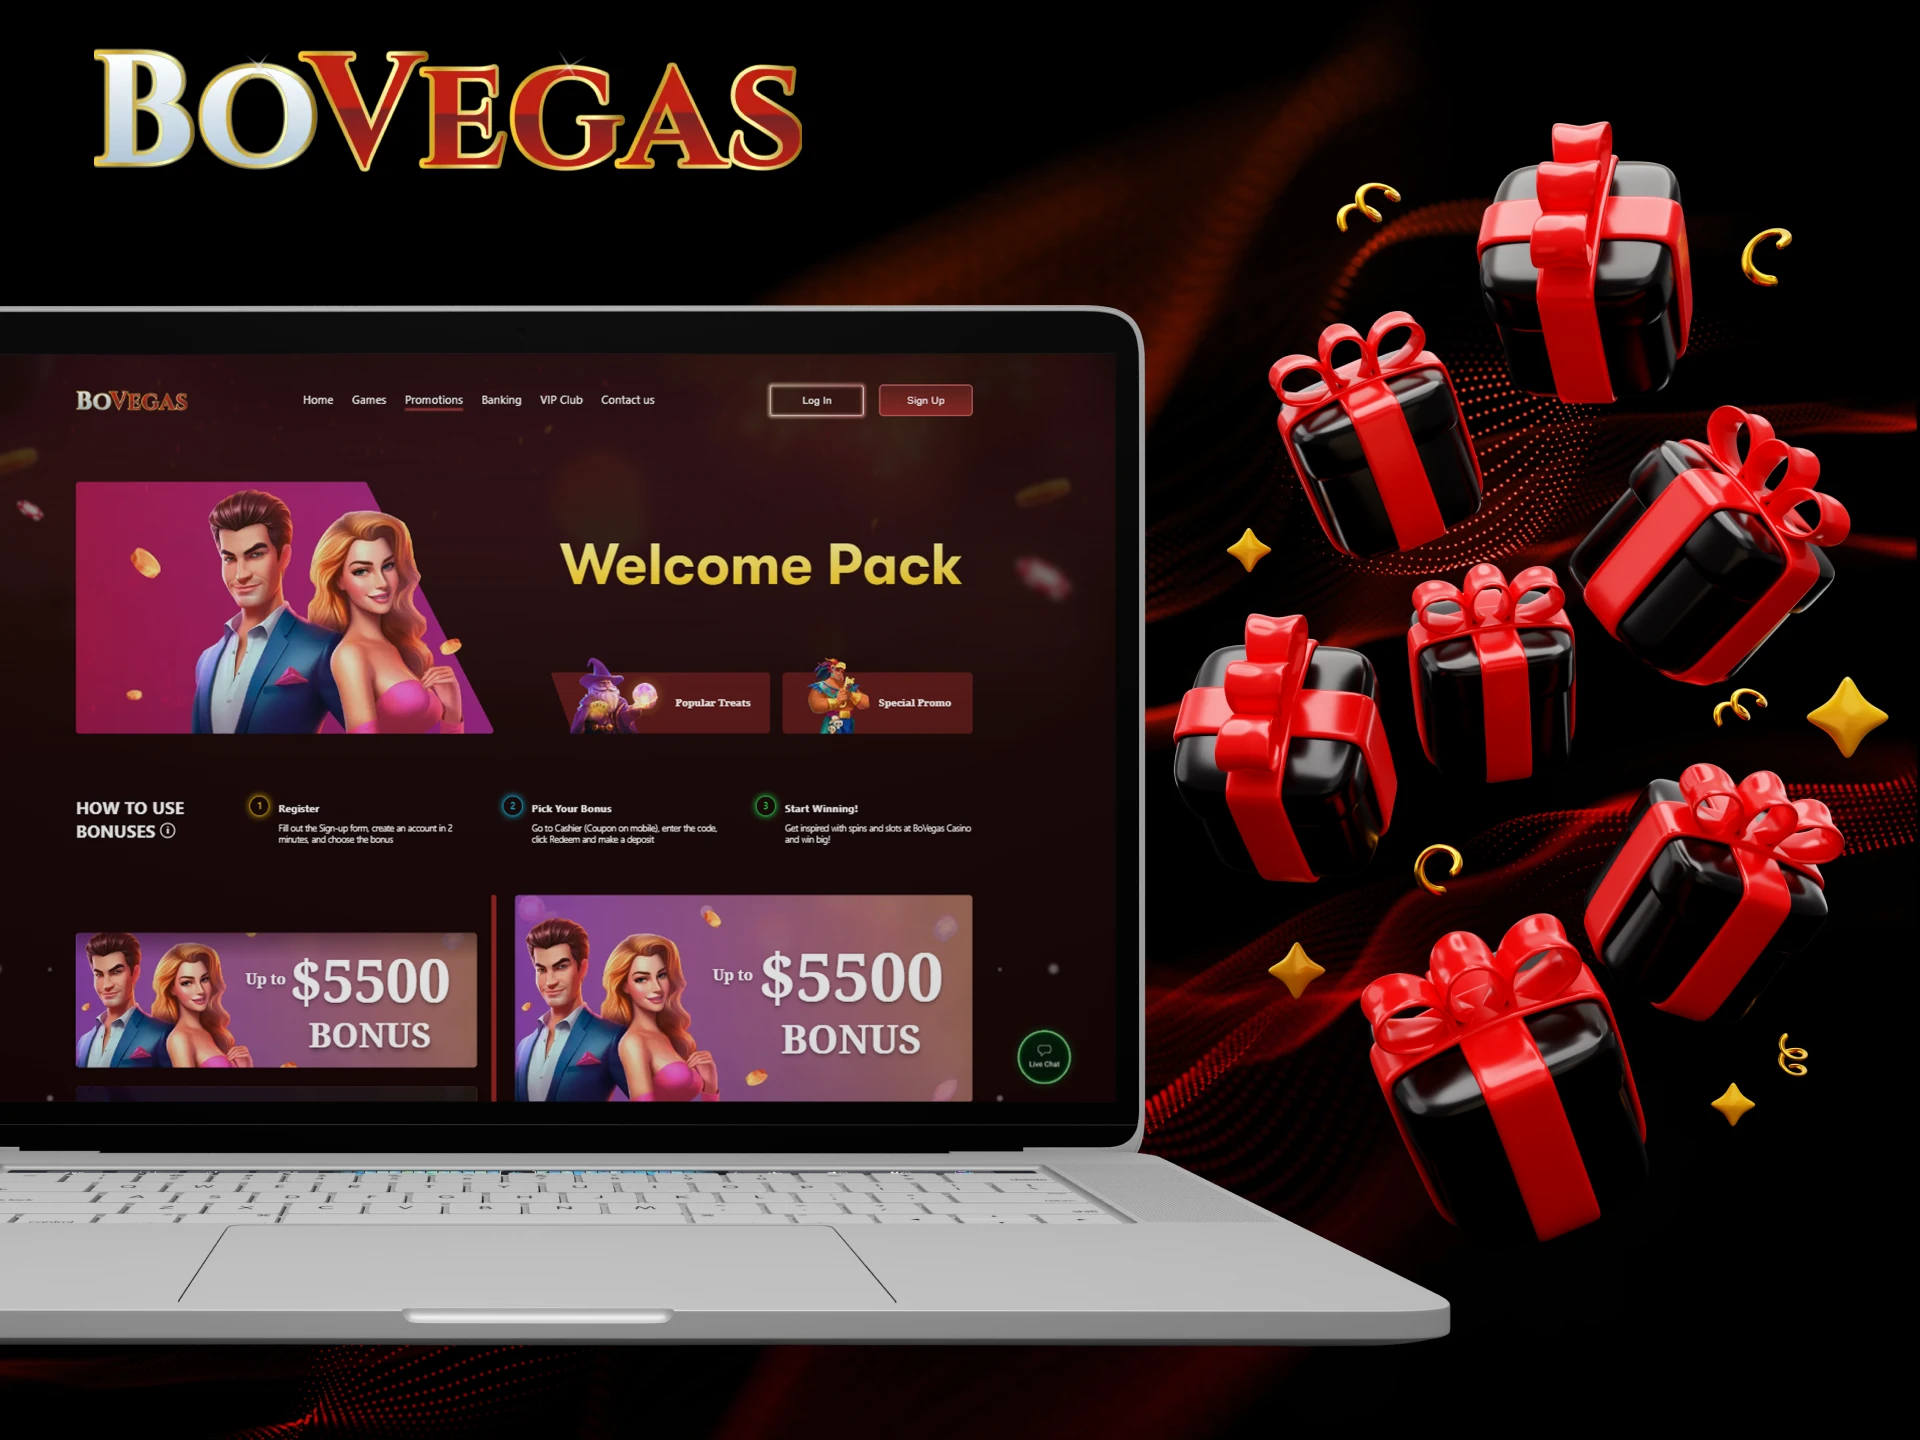 BoVegas Casino provides a lot of bonuses for new and existing players.